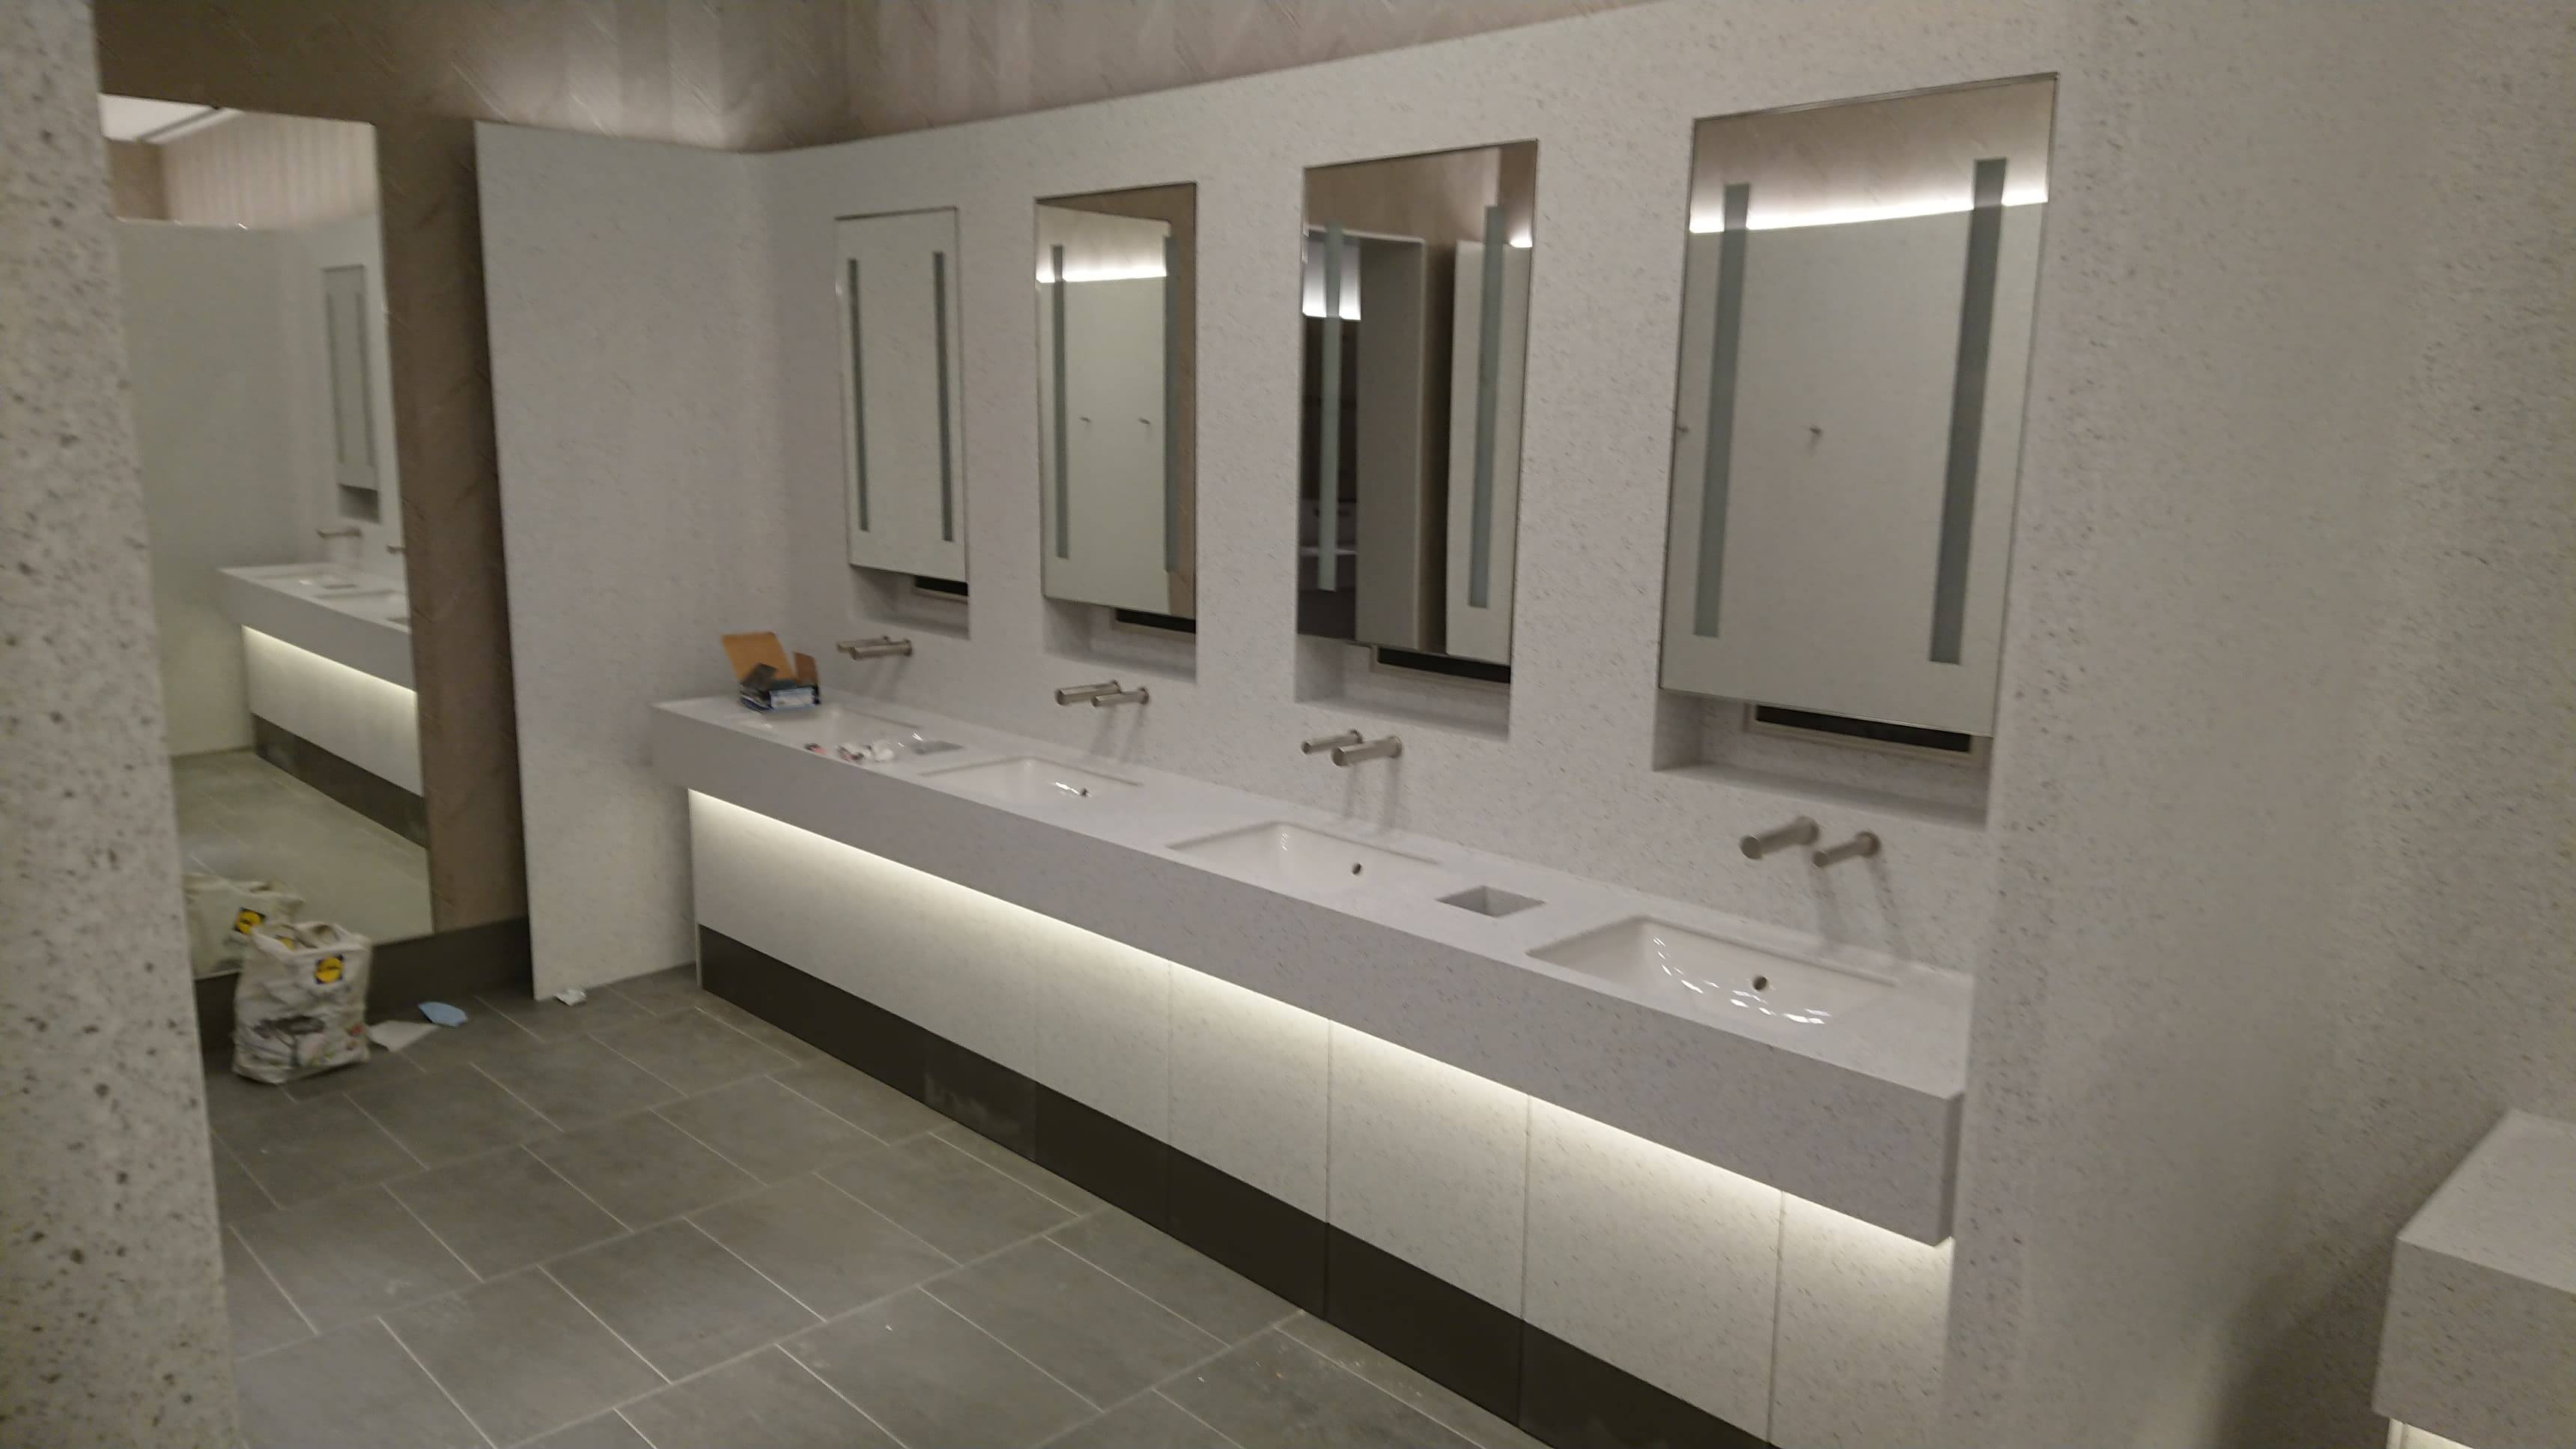 Plumtree Court, Shoe Lane, Central London, EC4 - Skilled Corian fitters 5